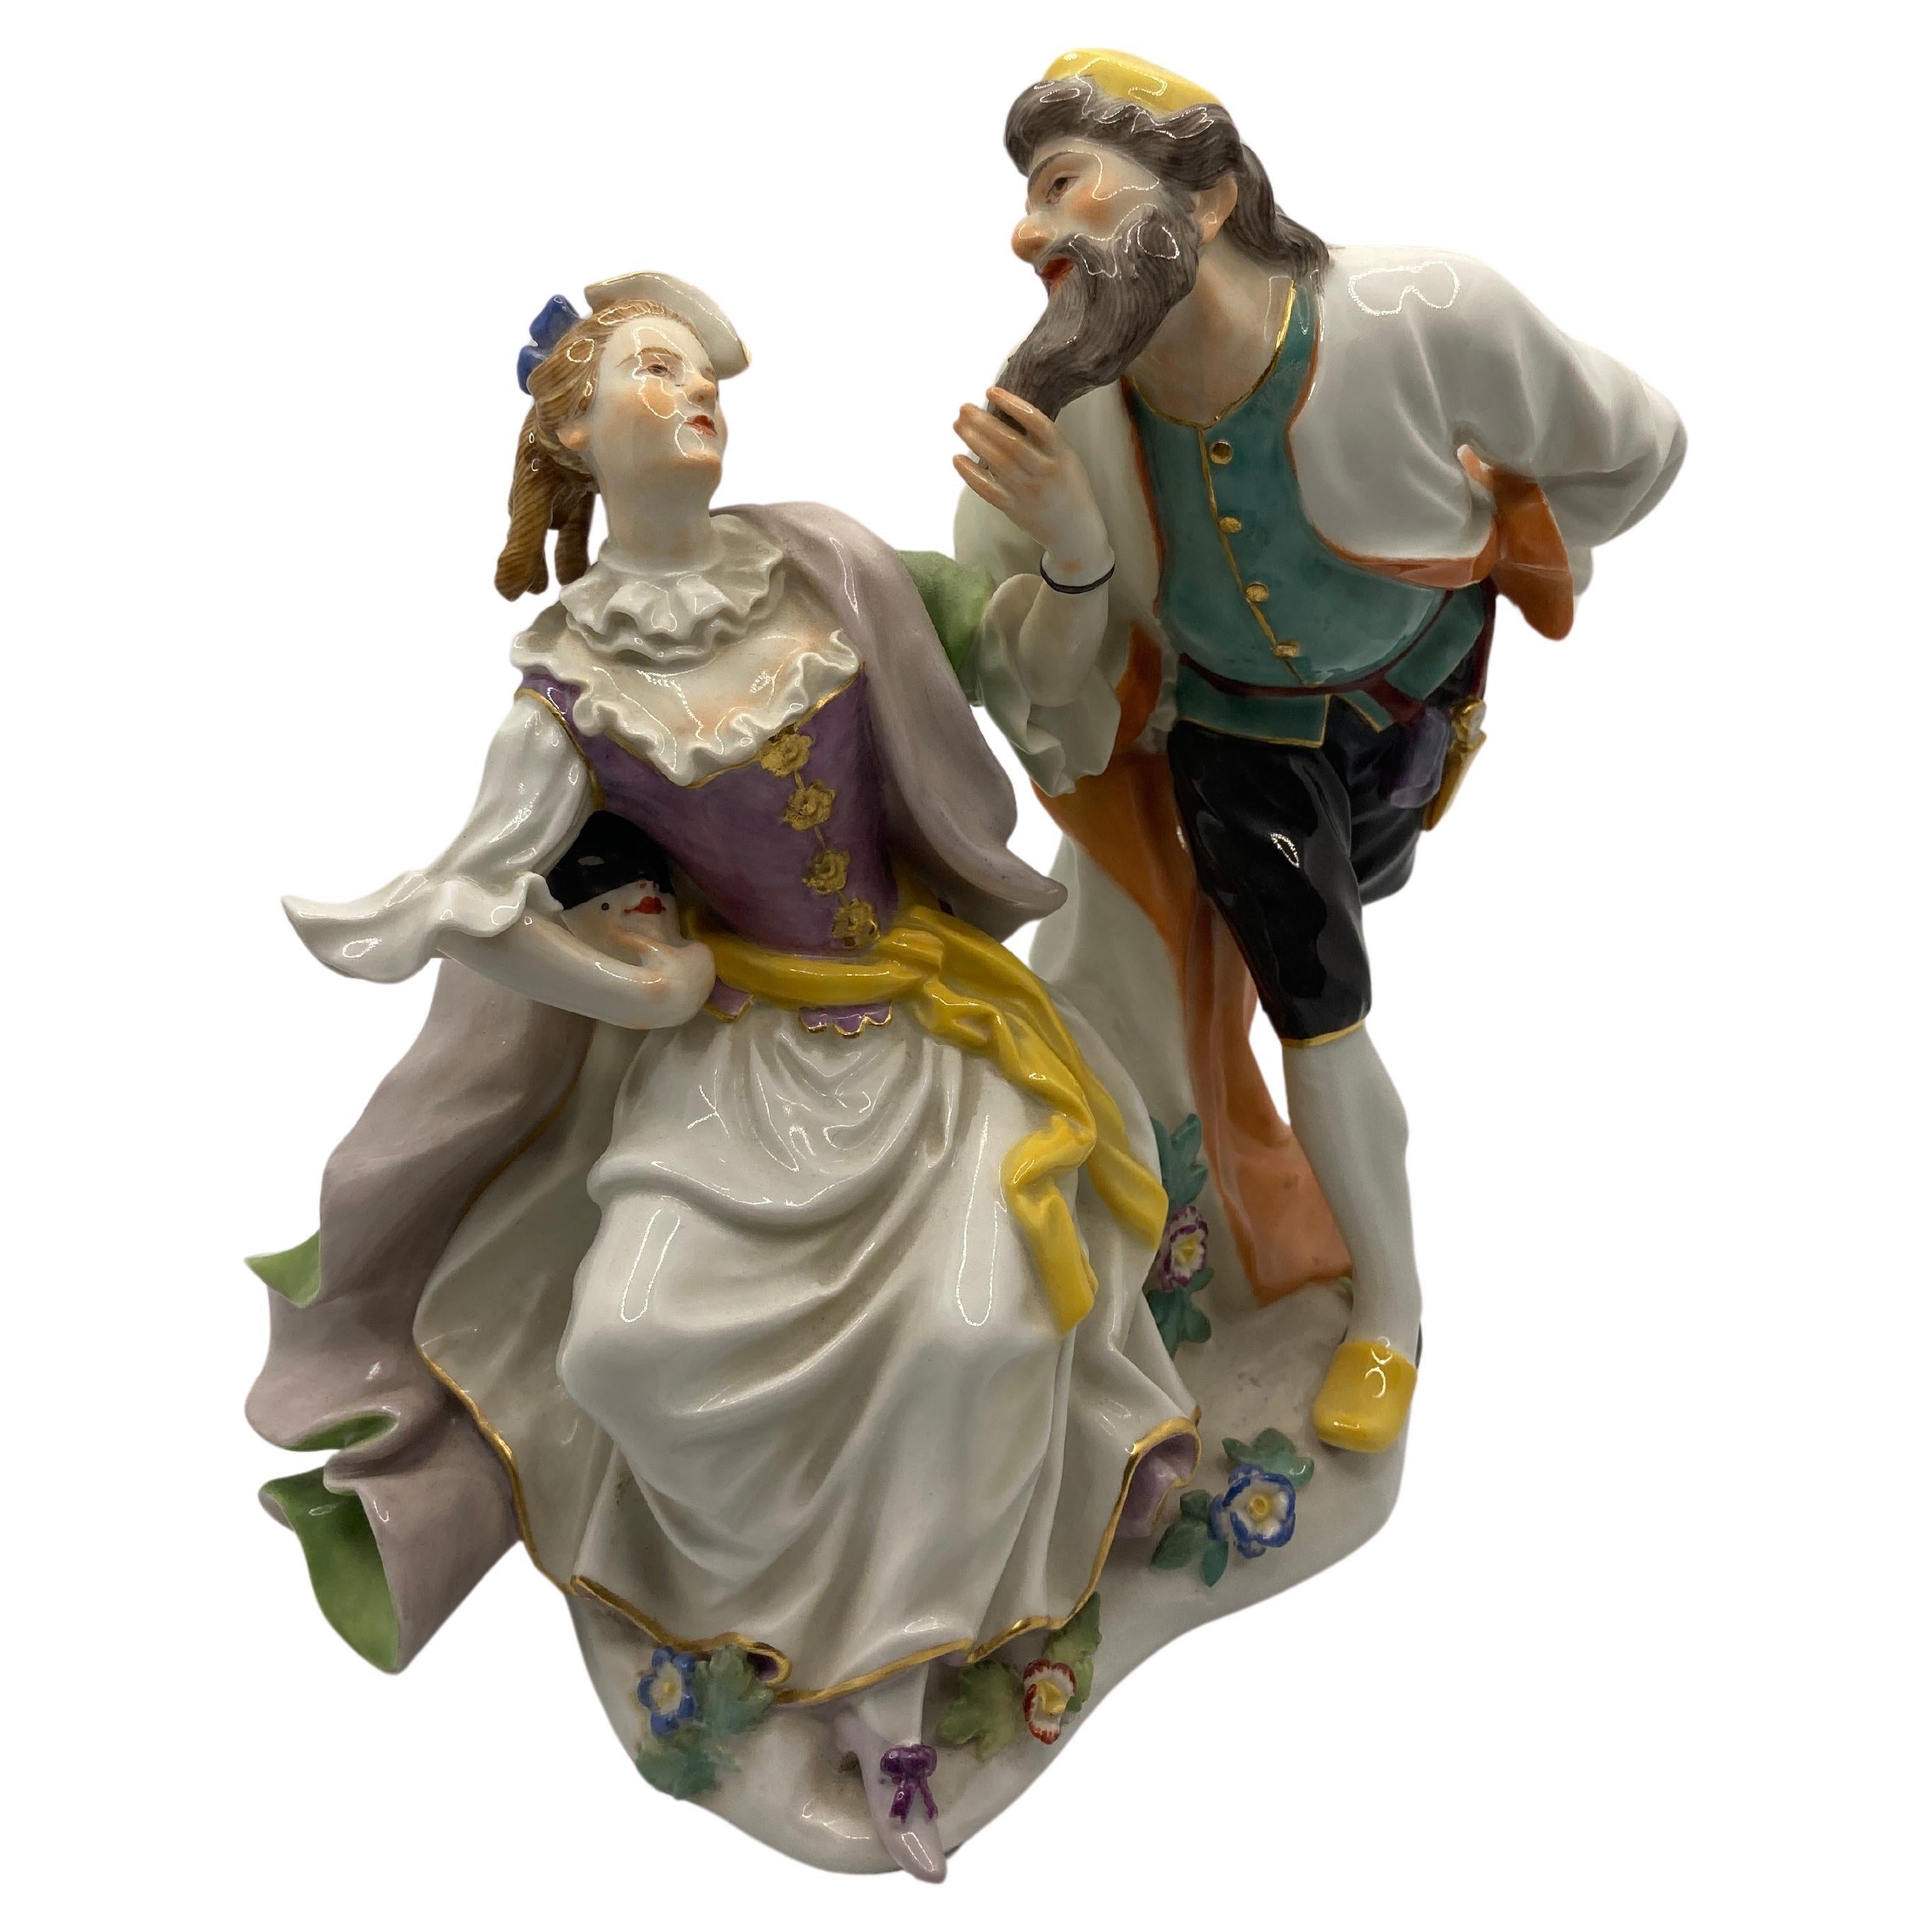 How can I tell if Meissen is real?